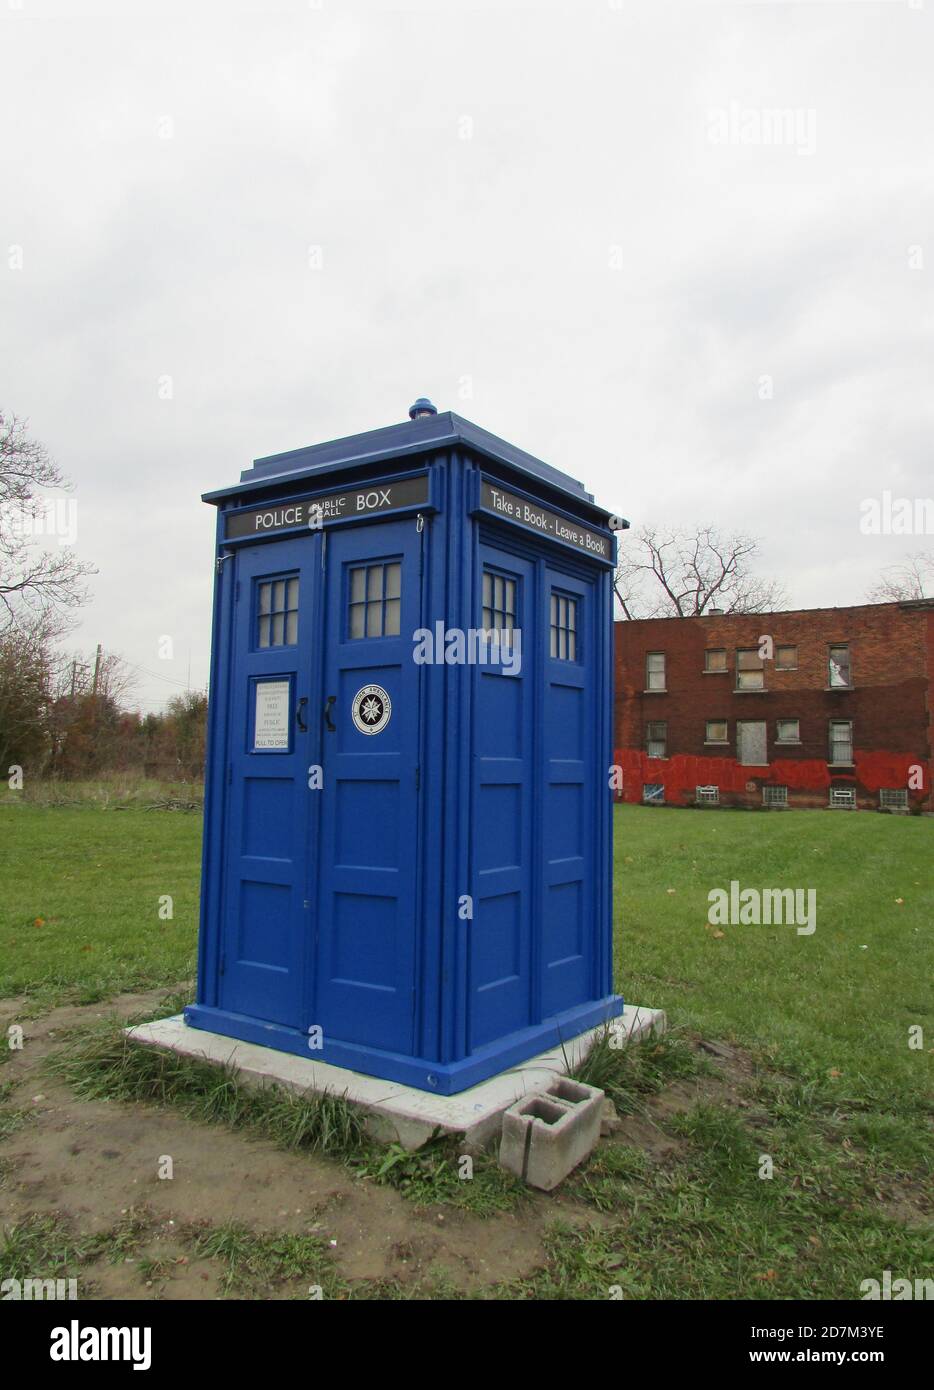 Doctor Who TARDIS police box in a park in Detroit Stock Photo